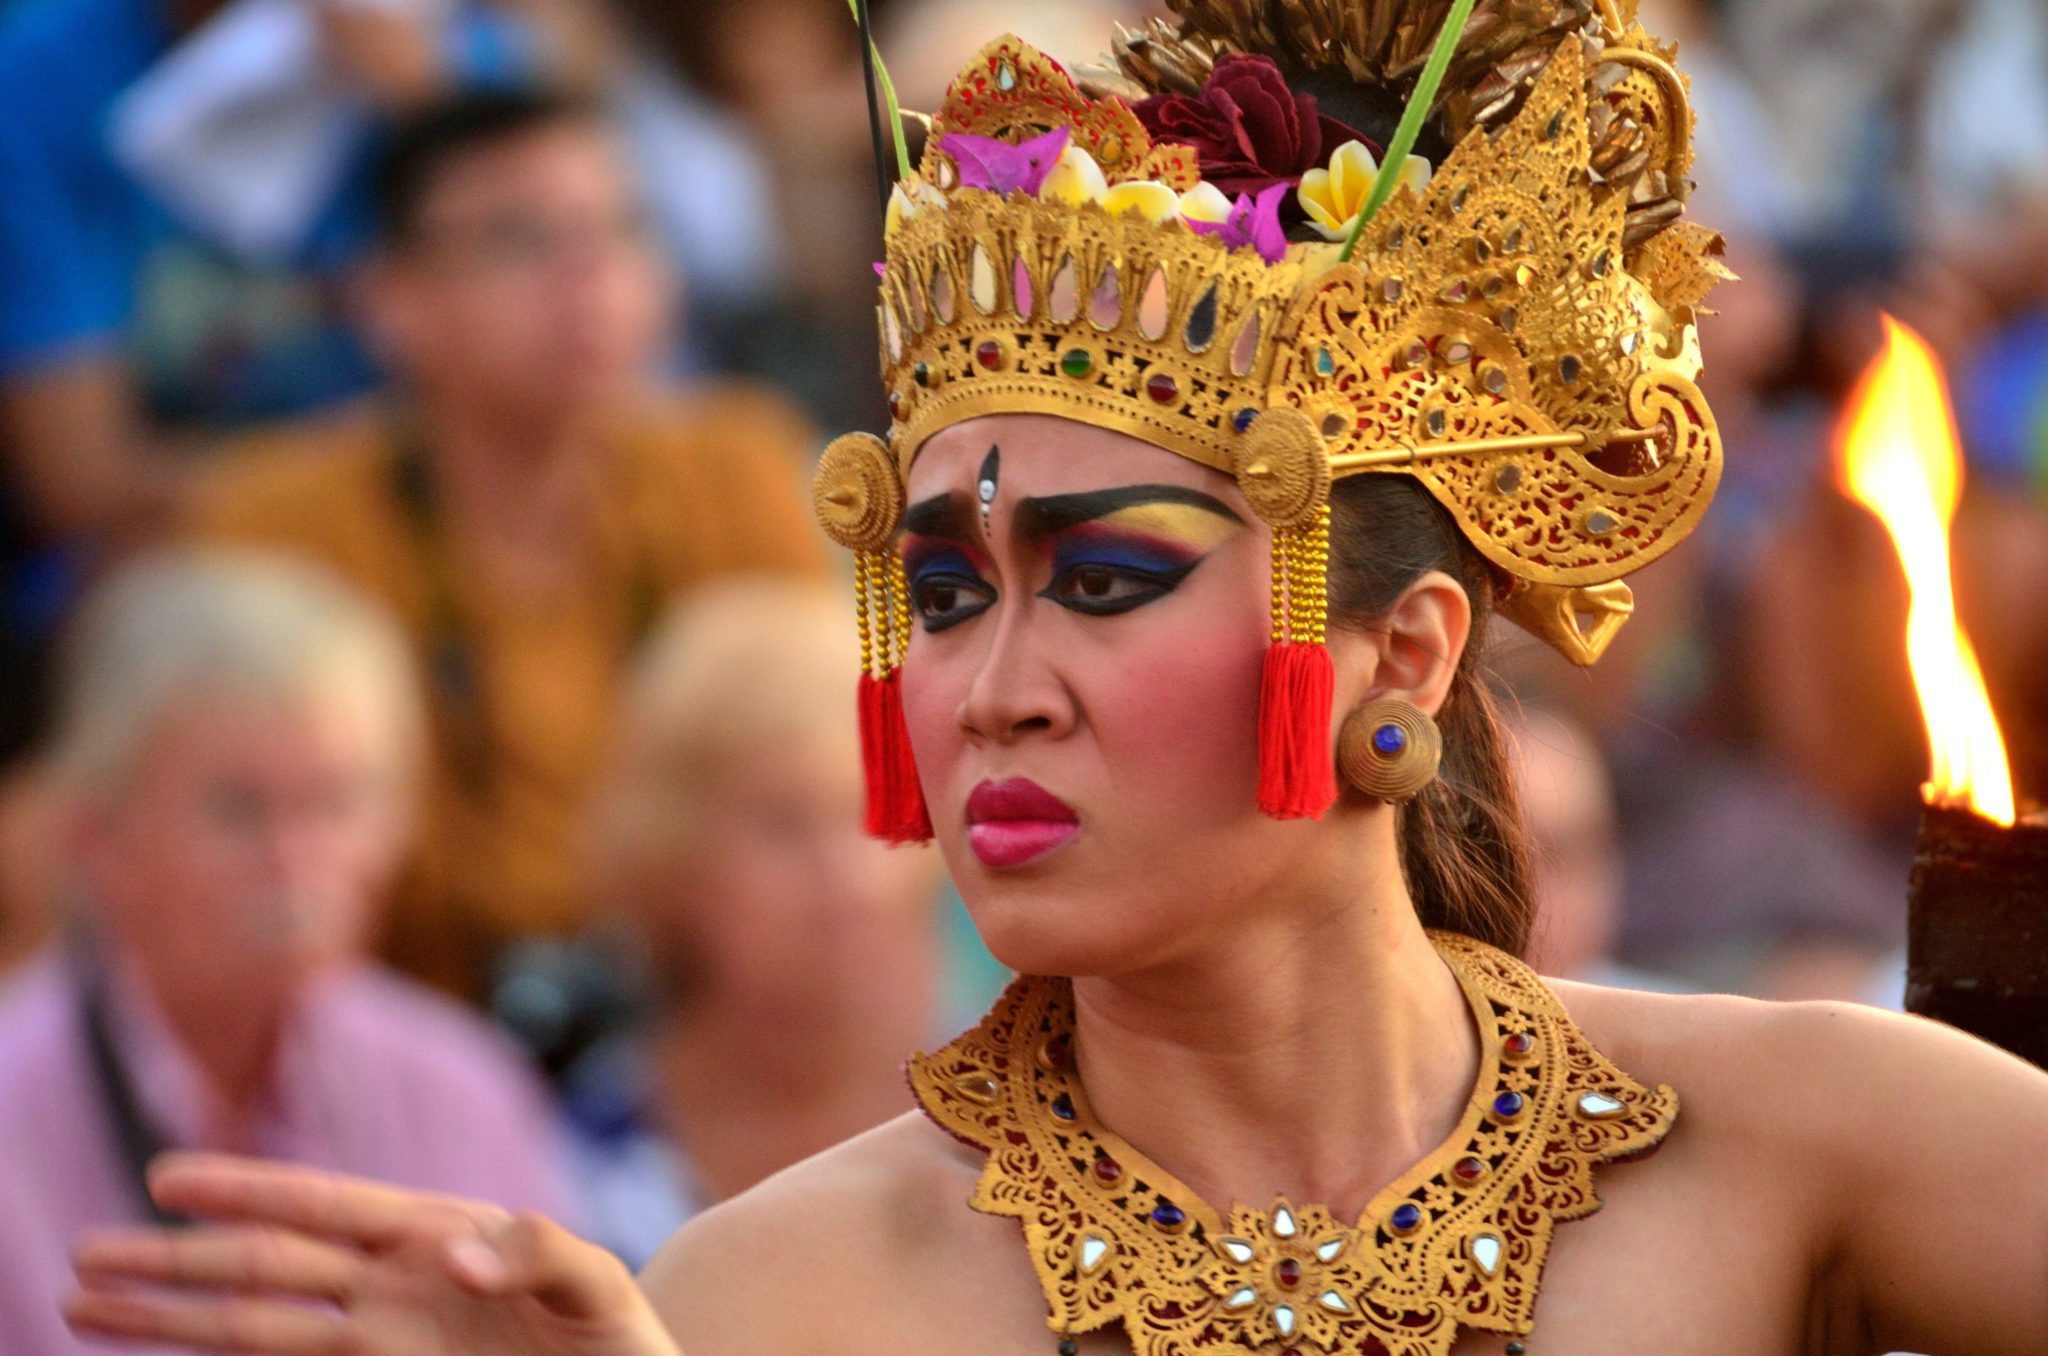  A performer wearing a traditional Balinese headdress and costume performs a traditional Indonesian folk tale drama.